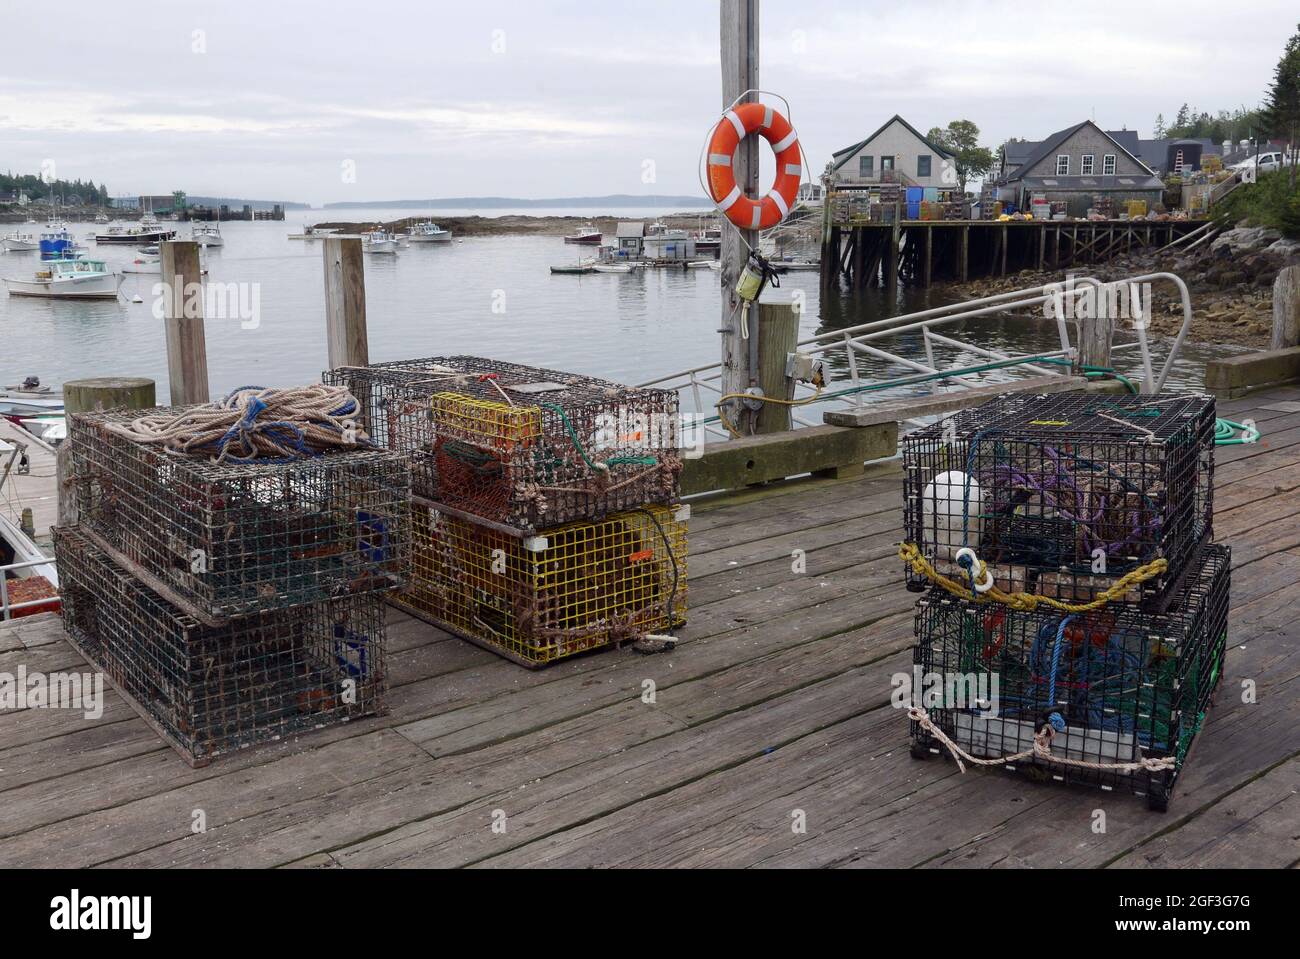 Lobster pots on the Town Wharf in Bernard on Bass Harbor,Mt Desert, Maine. Top right is Thurstons Lobster Pound. Stock Photo